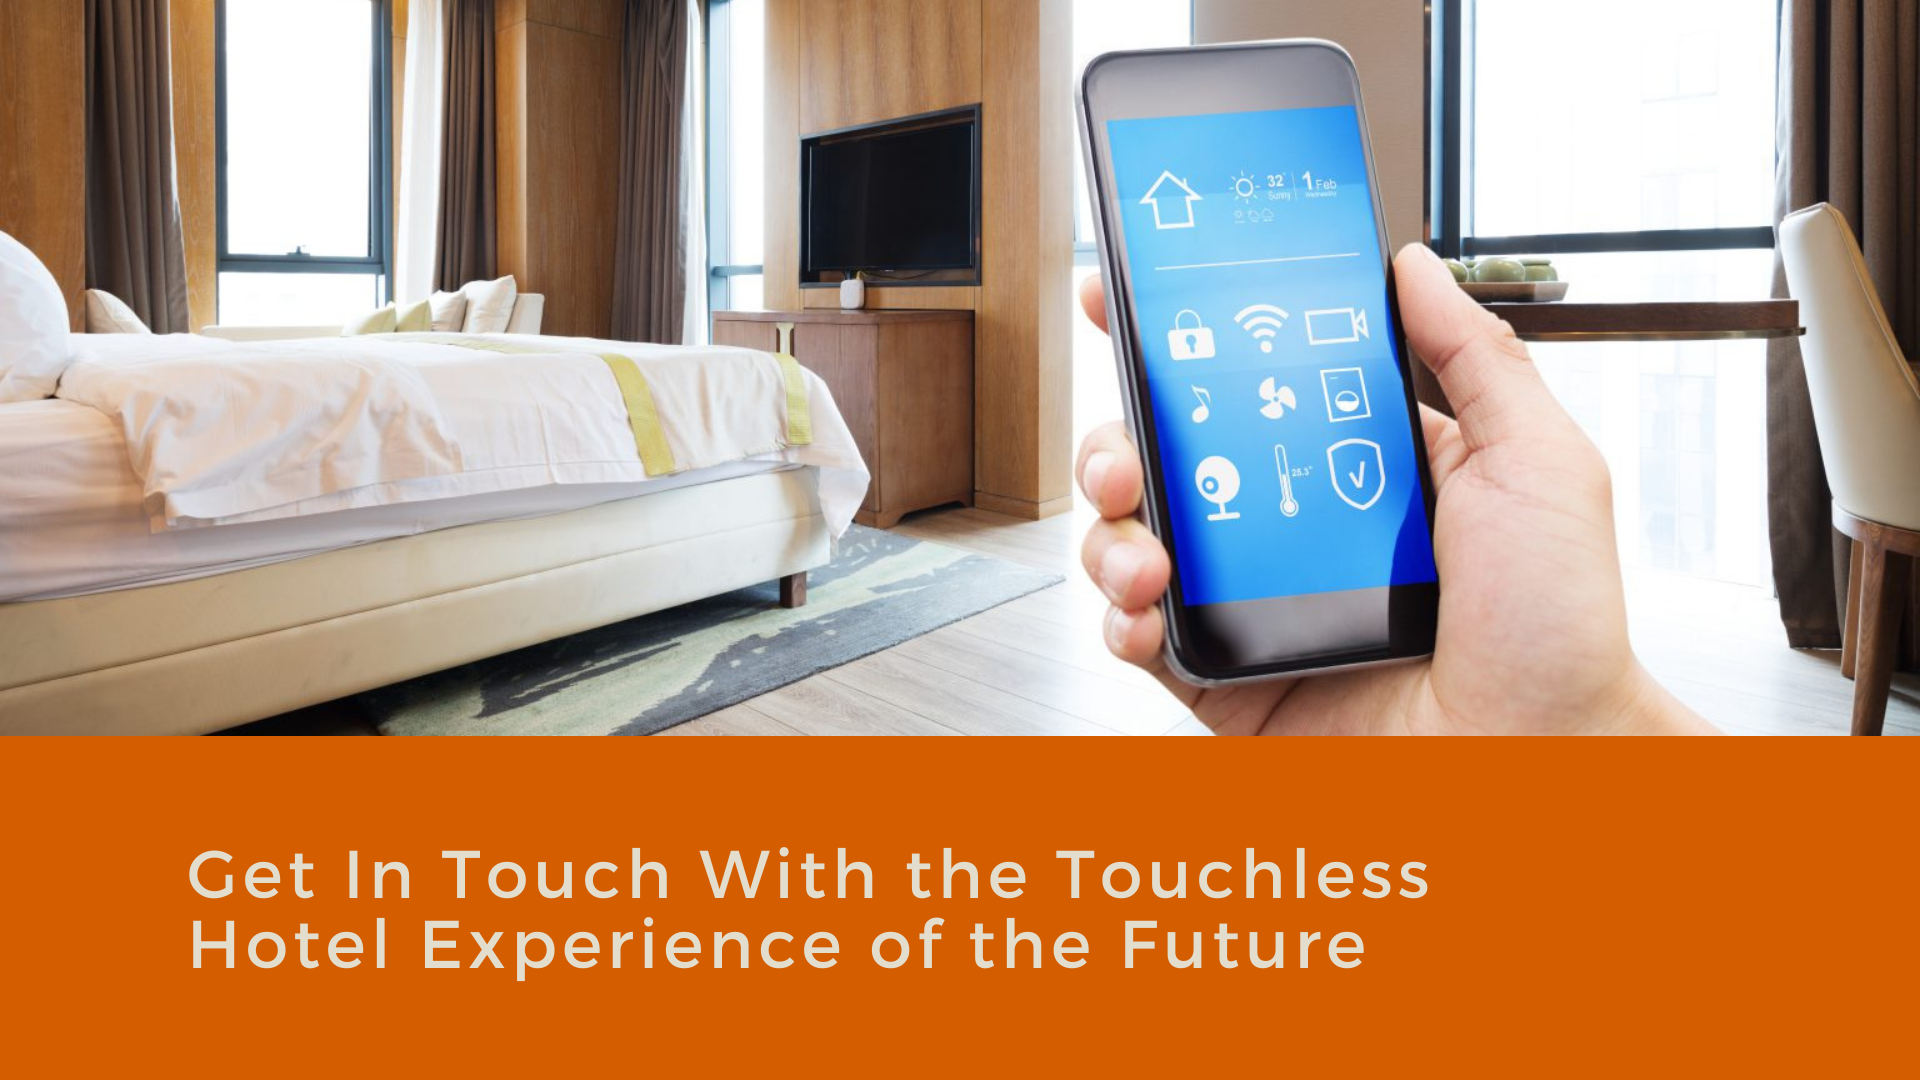 Get In Touch With the Touchless Hotel Experience of the Future